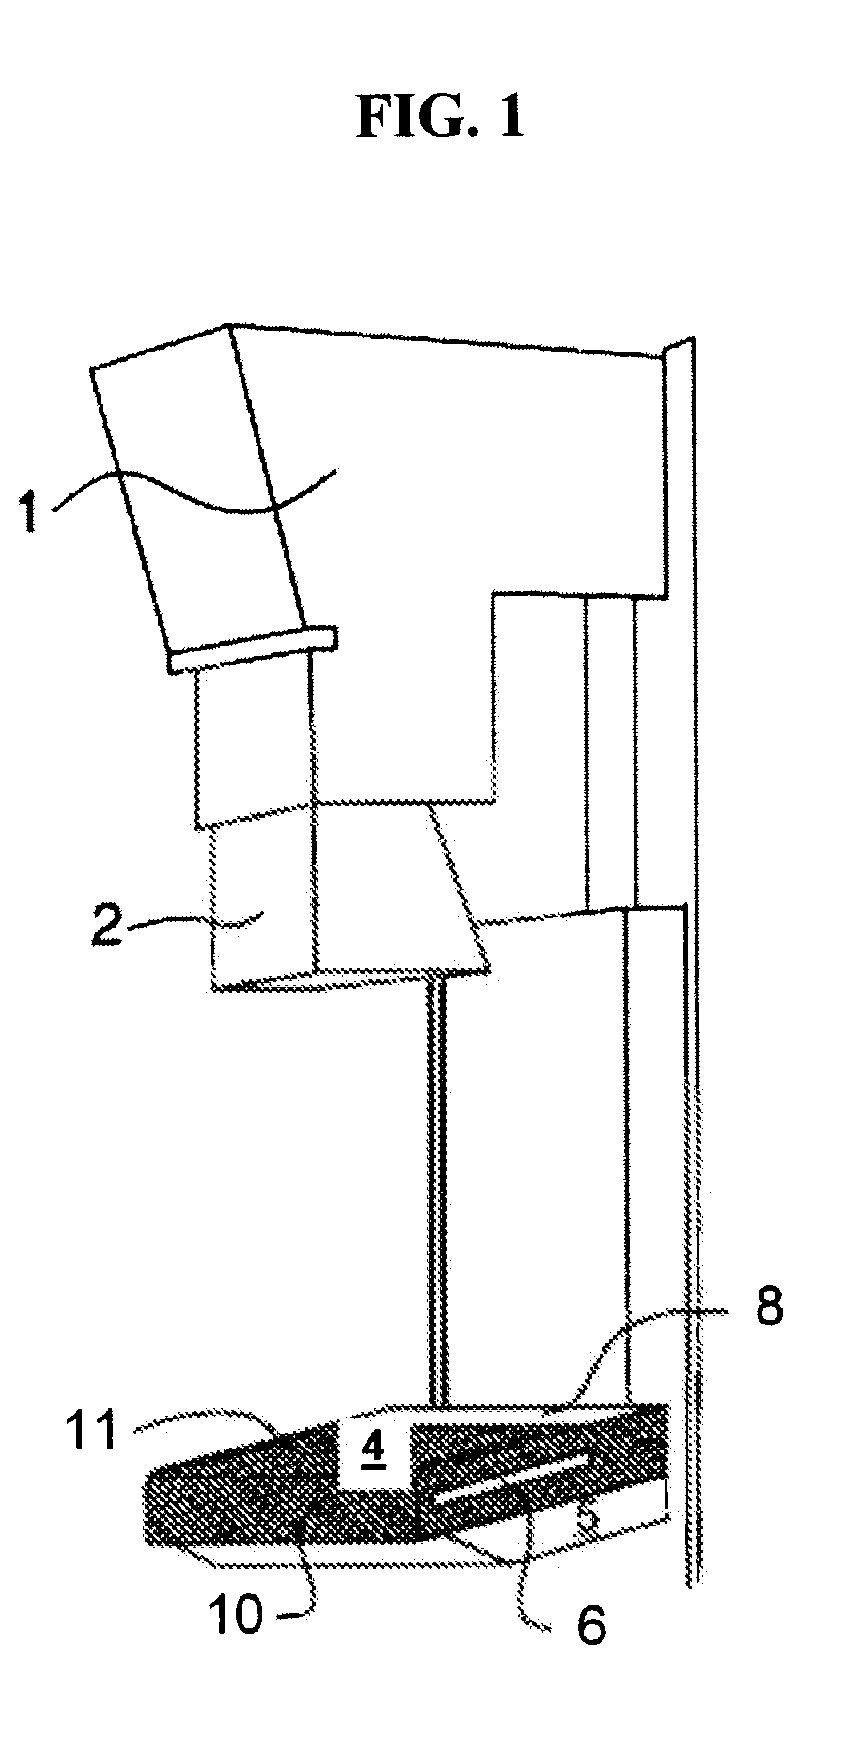 Mammography Systems and Methods, Including Methods for Improving the Sensitivity and Specificity of the Computer-Assisted Detection (CAD) Process